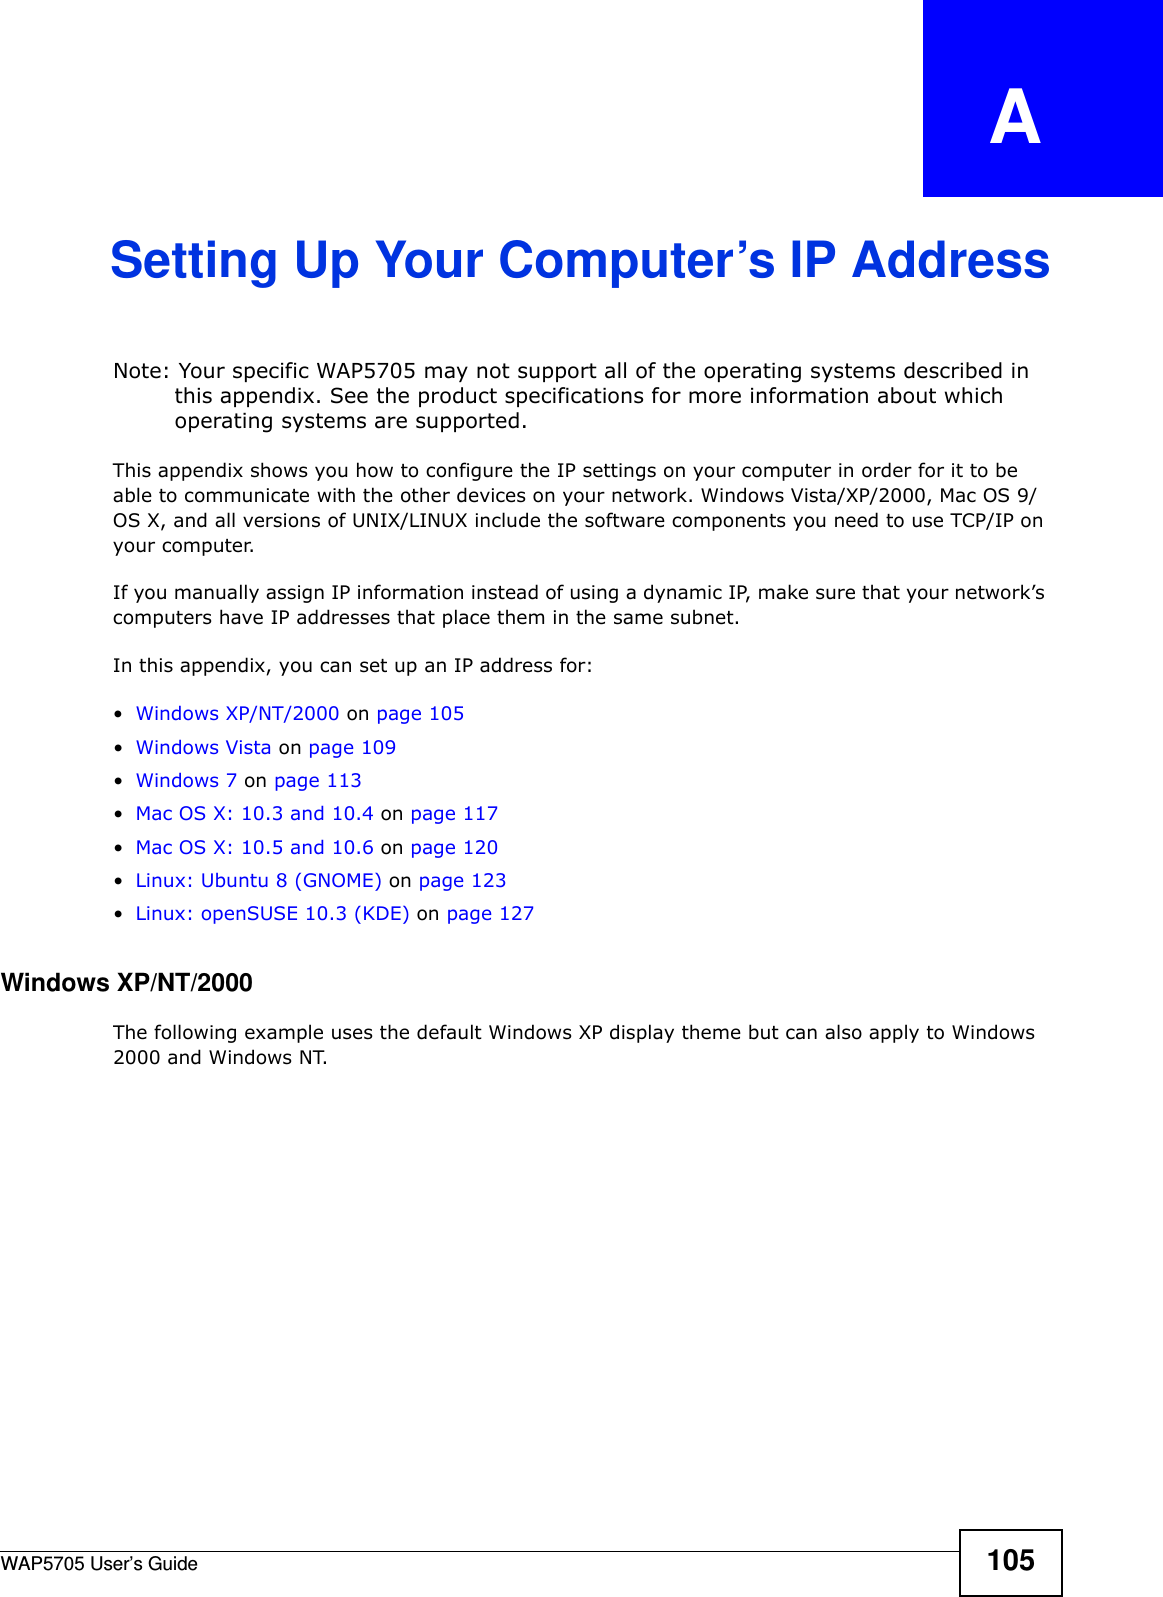 WAP5705 User’s Guide 105APPENDIX   ASetting Up Your Computer’s IP AddressNote: Your specific WAP5705 may not support all of the operating systems described in this appendix. See the product specifications for more information about which operating systems are supported.This appendix shows you how to configure the IP settings on your computer in order for it to be able to communicate with the other devices on your network. Windows Vista/XP/2000, Mac OS 9/OS X, and all versions of UNIX/LINUX include the software components you need to use TCP/IP on your computer. If you manually assign IP information instead of using a dynamic IP, make sure that your network’s computers have IP addresses that place them in the same subnet.In this appendix, you can set up an IP address for:•Windows XP/NT/2000 on page 105•Windows Vista on page 109•Windows 7 on page 113•Mac OS X: 10.3 and 10.4 on page 117•Mac OS X: 10.5 and 10.6 on page 120•Linux: Ubuntu 8 (GNOME) on page 123•Linux: openSUSE 10.3 (KDE) on page 127Windows XP/NT/2000The following example uses the default Windows XP display theme but can also apply to Windows 2000 and Windows NT.